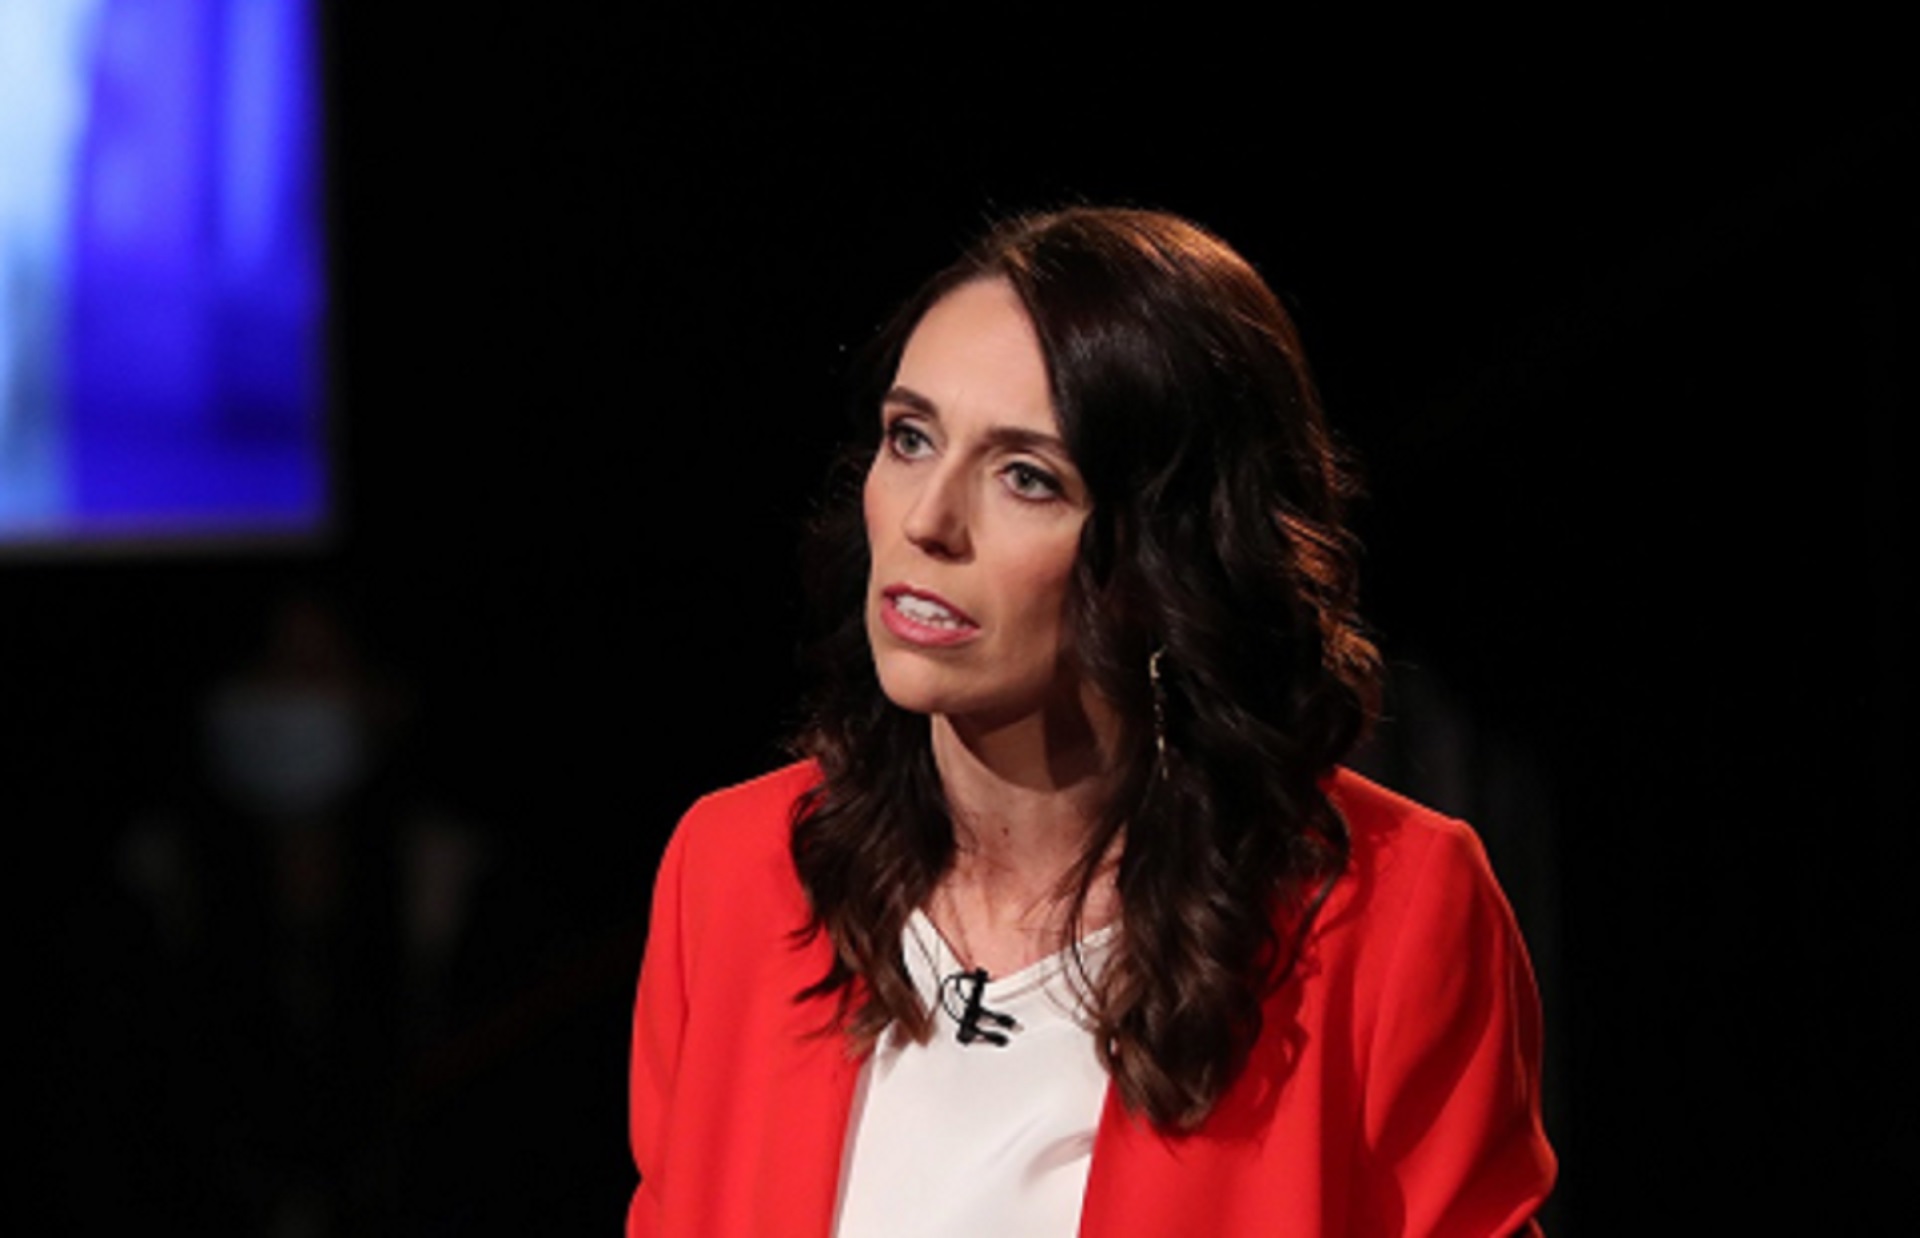 epa08707507 Labour Party's Prime Minister Jacinda Ardern attends the 2020 Leaders Debate in Auckland, New Zealand, 30 September 2020. New Zealand is slated to hold its general election on 17 October 2020.  EPA/MICHAEL BRADLEY / POOL POOL